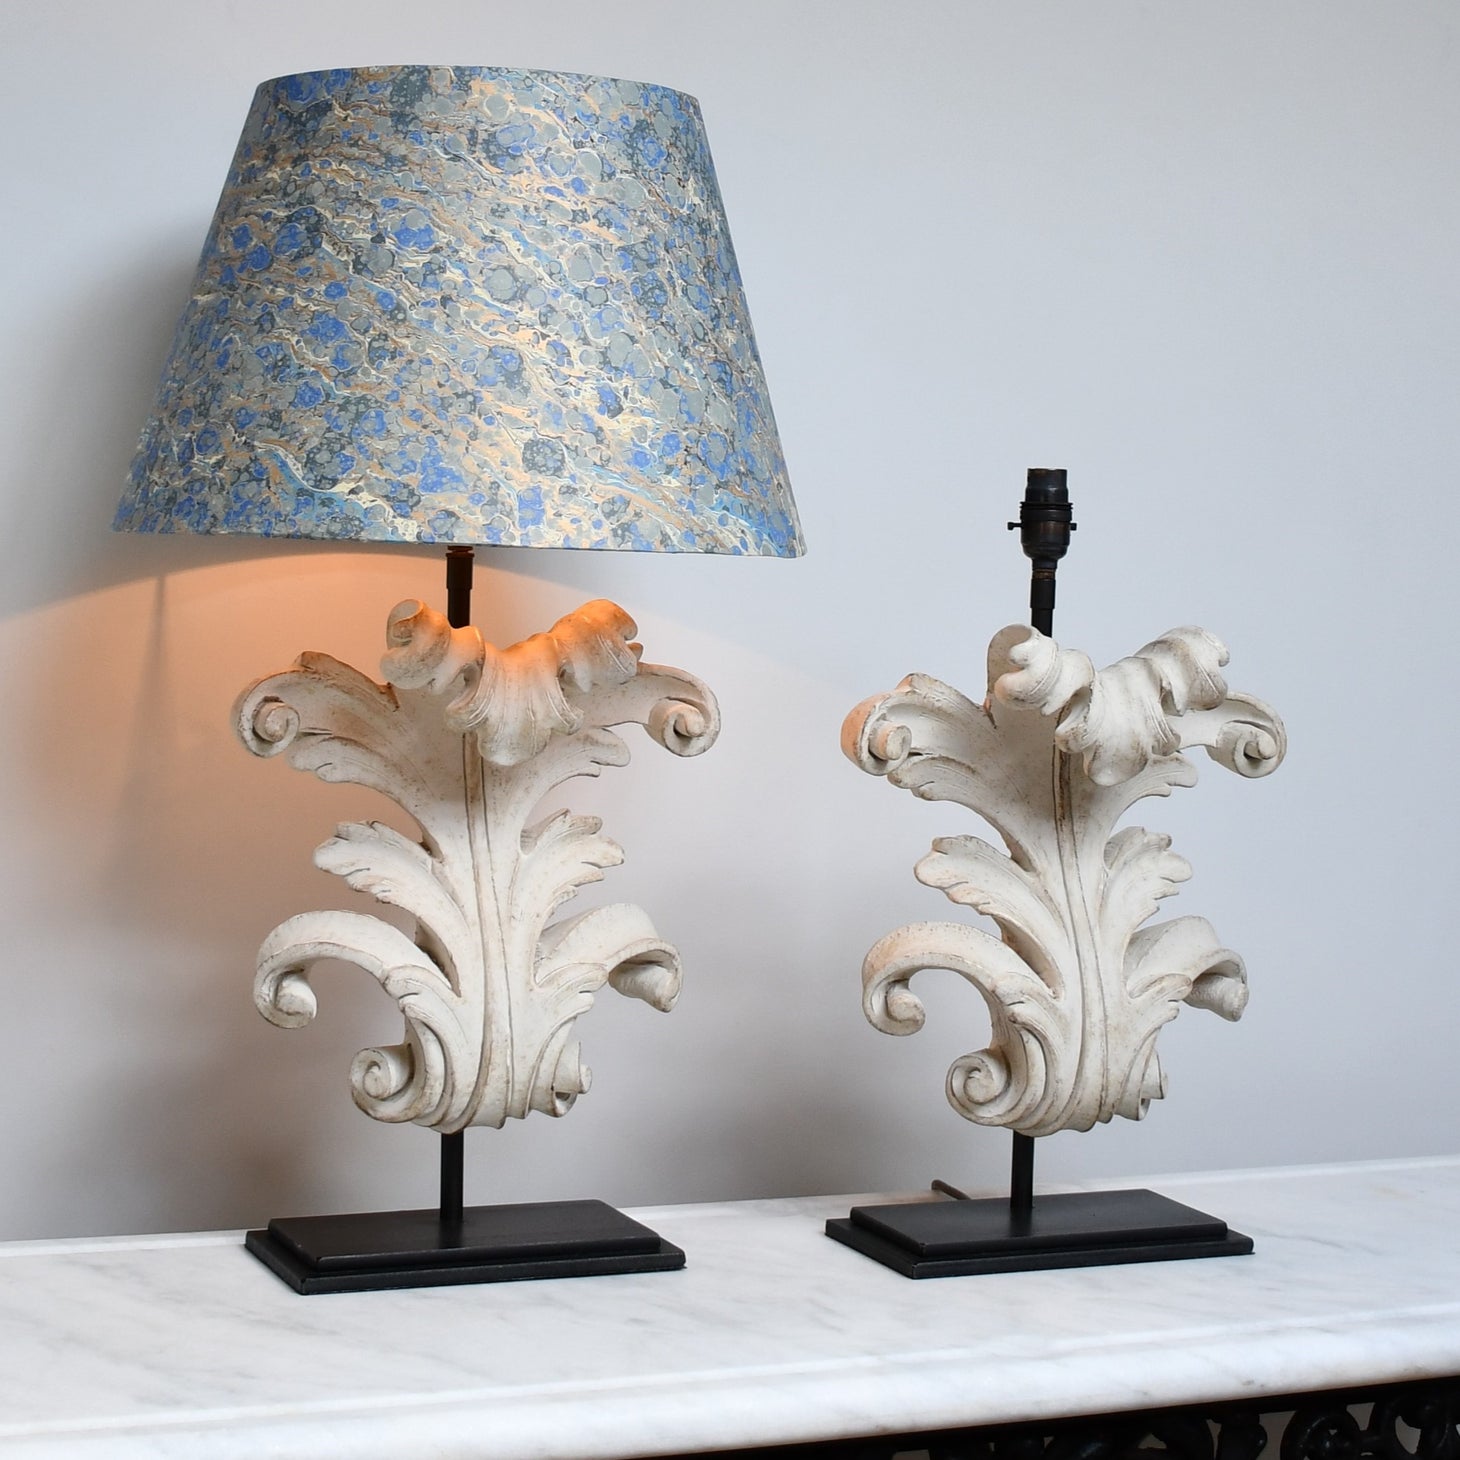 A Pair of Acanthus Leaf - Table Lamps